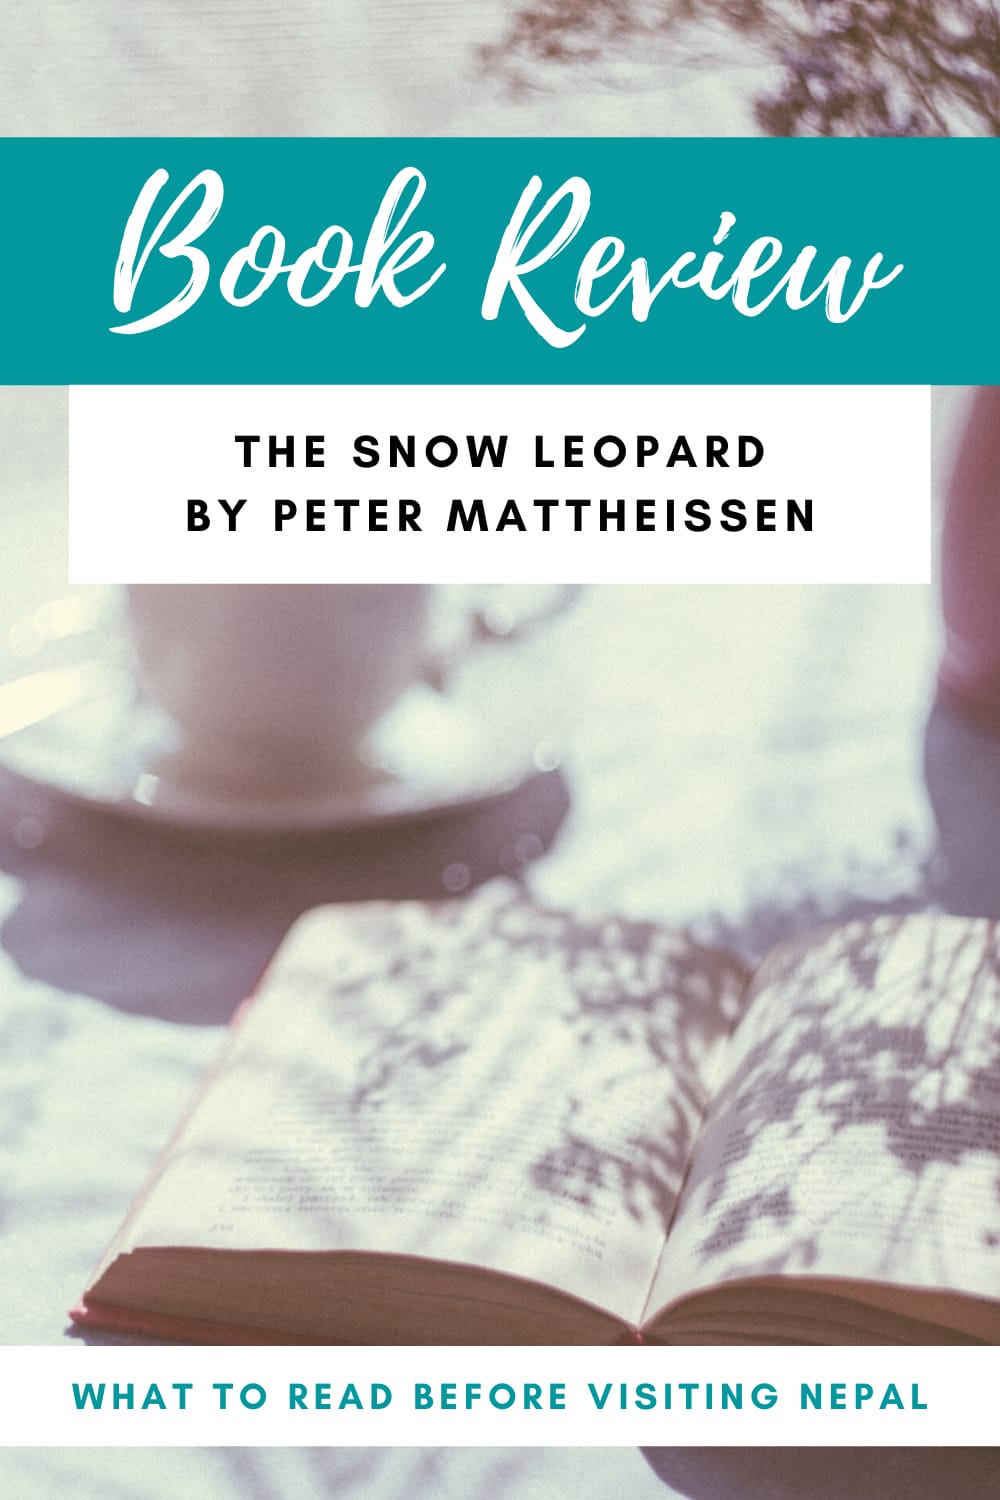 Book Review: The Snow Leopard by Peter Mattheissen | Full Time Explorer | Books About Nepal | Books about the Himalaya | Travel Books | Travel Memoirs | Books About Traveling | Vacation Reads | Beach Reads | Travel Genre | Inner Journey | Finding Oneself | Airplane Entertainment #travel #book #memoir #travelmemoir #entertainment #nepal #himalaya #trekking #dolpa #dolpo